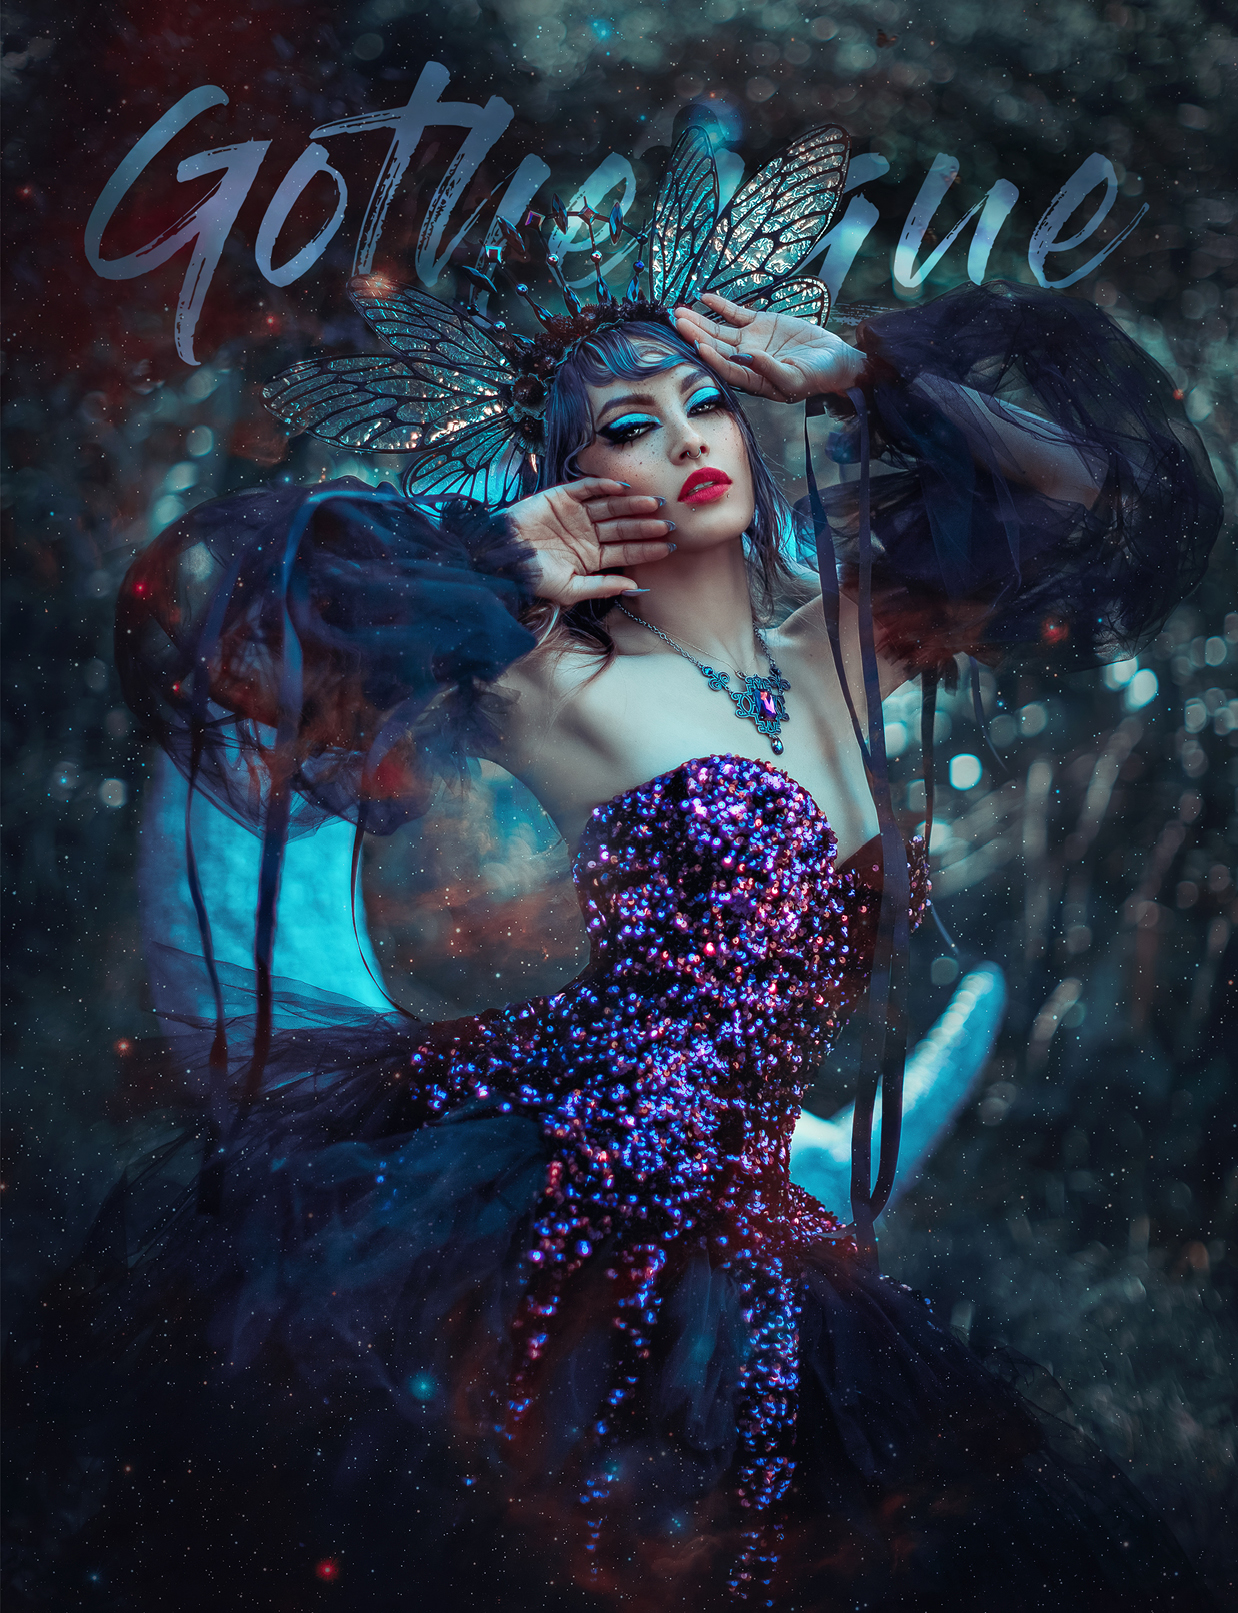 On the cover, we have an almost Ancient Greek wood nymph! Colors of cyan, magenta, purple, and even some reds bleed beautifully through this image, and although a still capture, it appears to remain in motion. A stunning model with unique makeup poses with an eyecatching gown and fae-inspired headdress. This mystical image is by Yellow Bubbles and Spoiled Cherry of the model Anjella Stoned. This creative team always creates nothing short of magic!